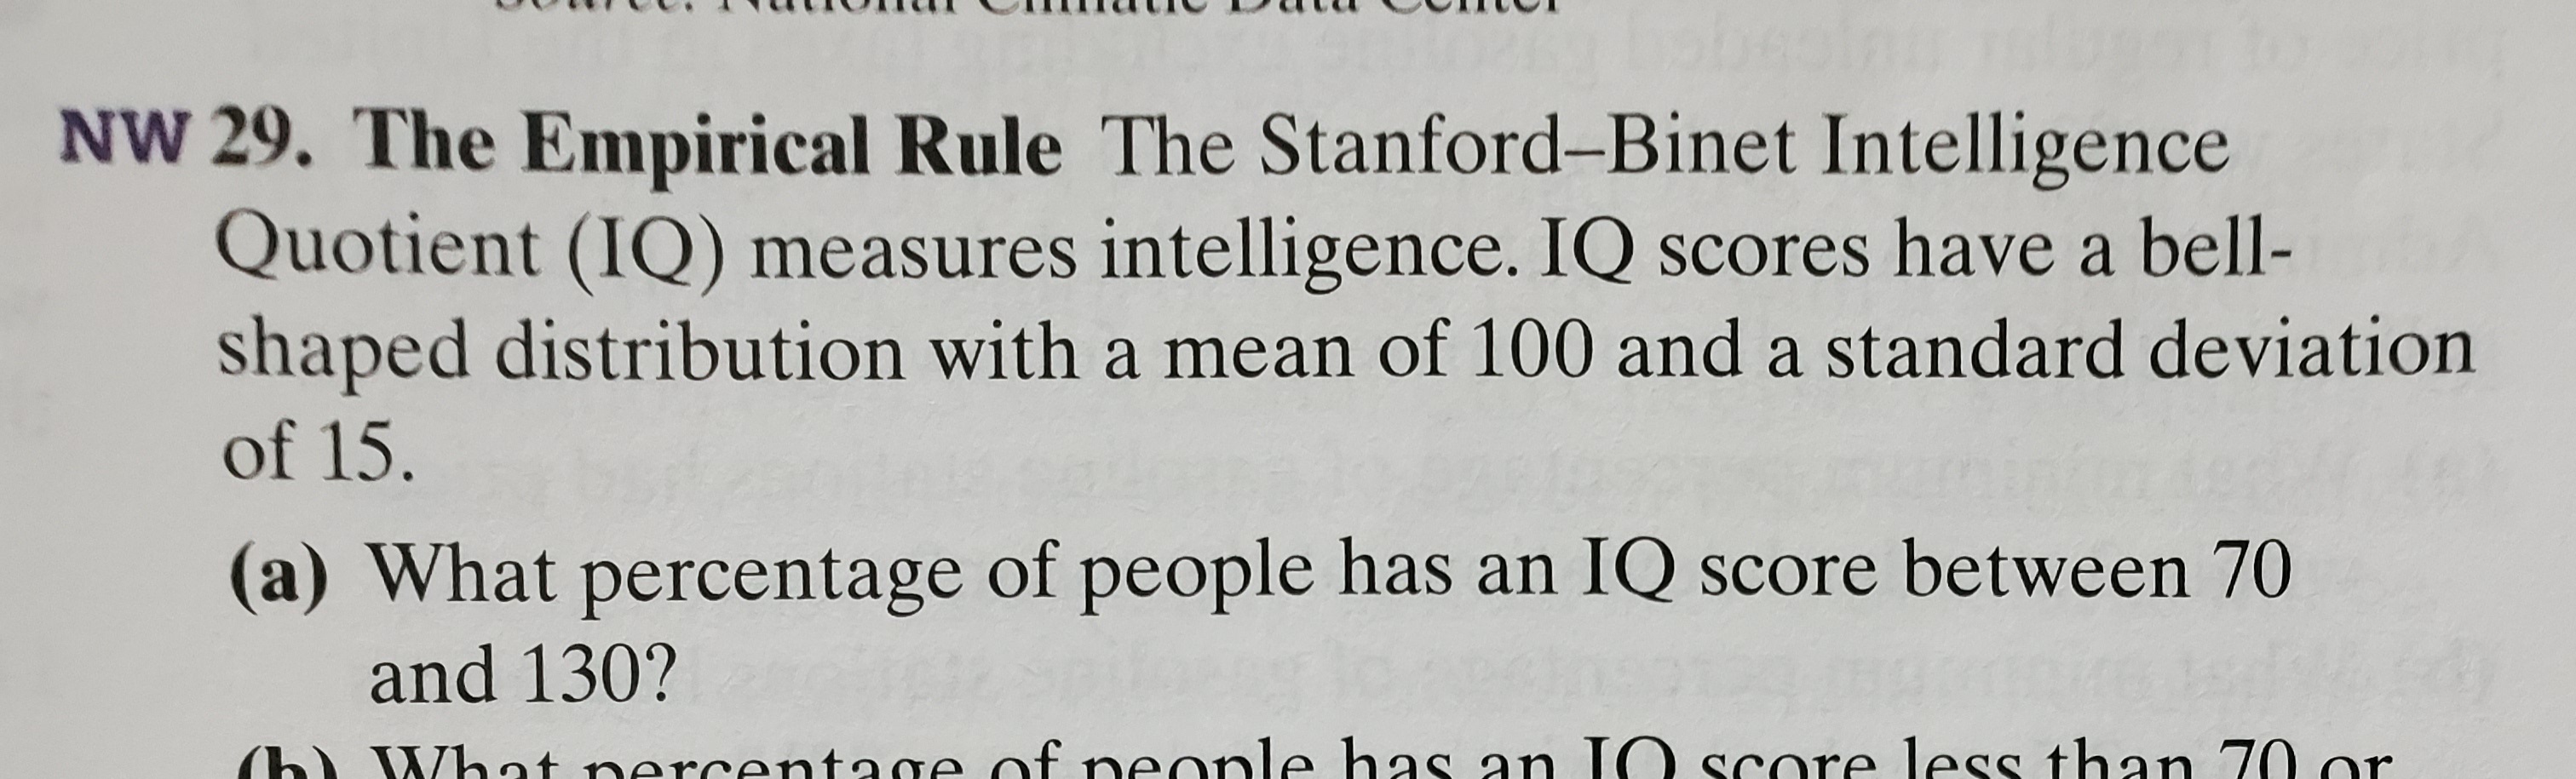 The Empirical Rule The Stanford-Binet Intelligence
otient (IQ) measures intelligence. IQ scores have a bell-
ped distribution with a mean of 100 and a standard deviation
